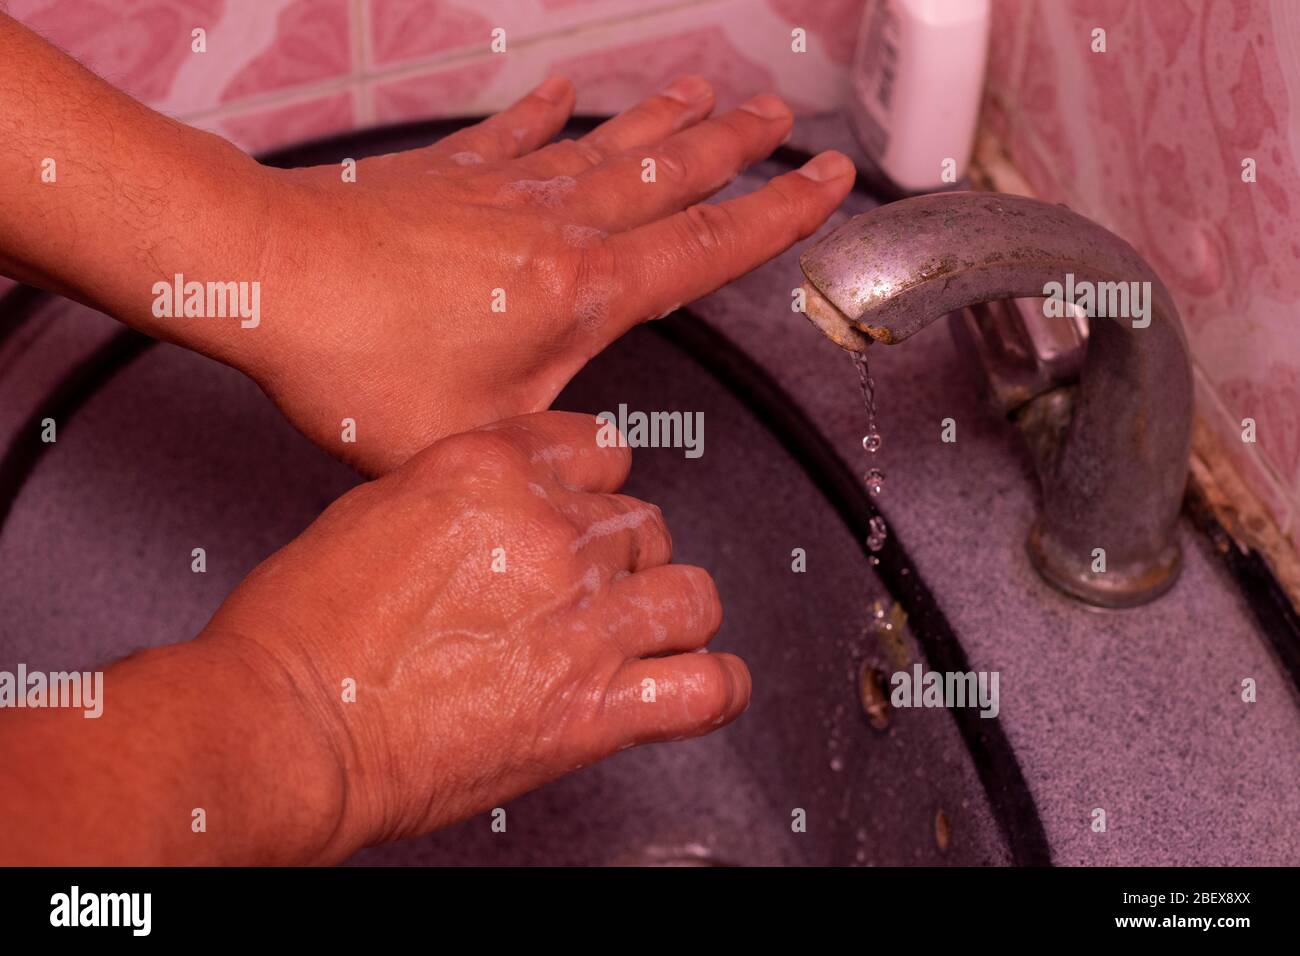 Washing hands pictures in the time of pandemic Stock Photo